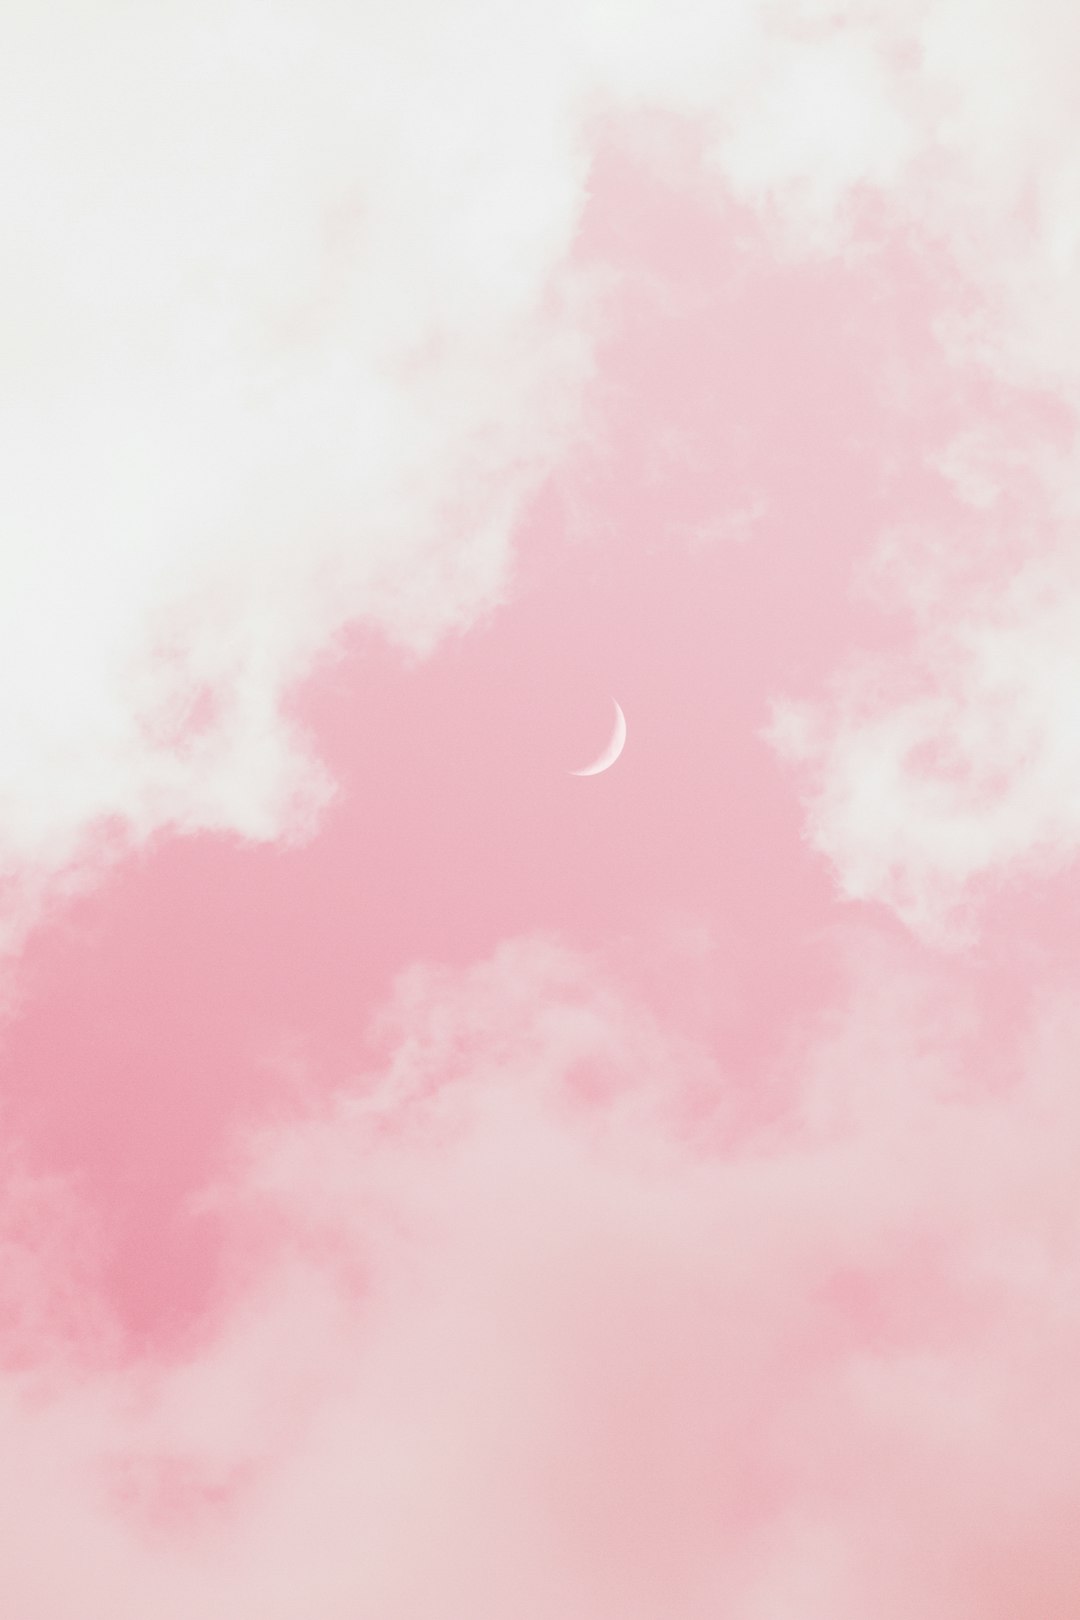 550+ Pink Aesthetic Pictures | Download Free Images on Unsplash